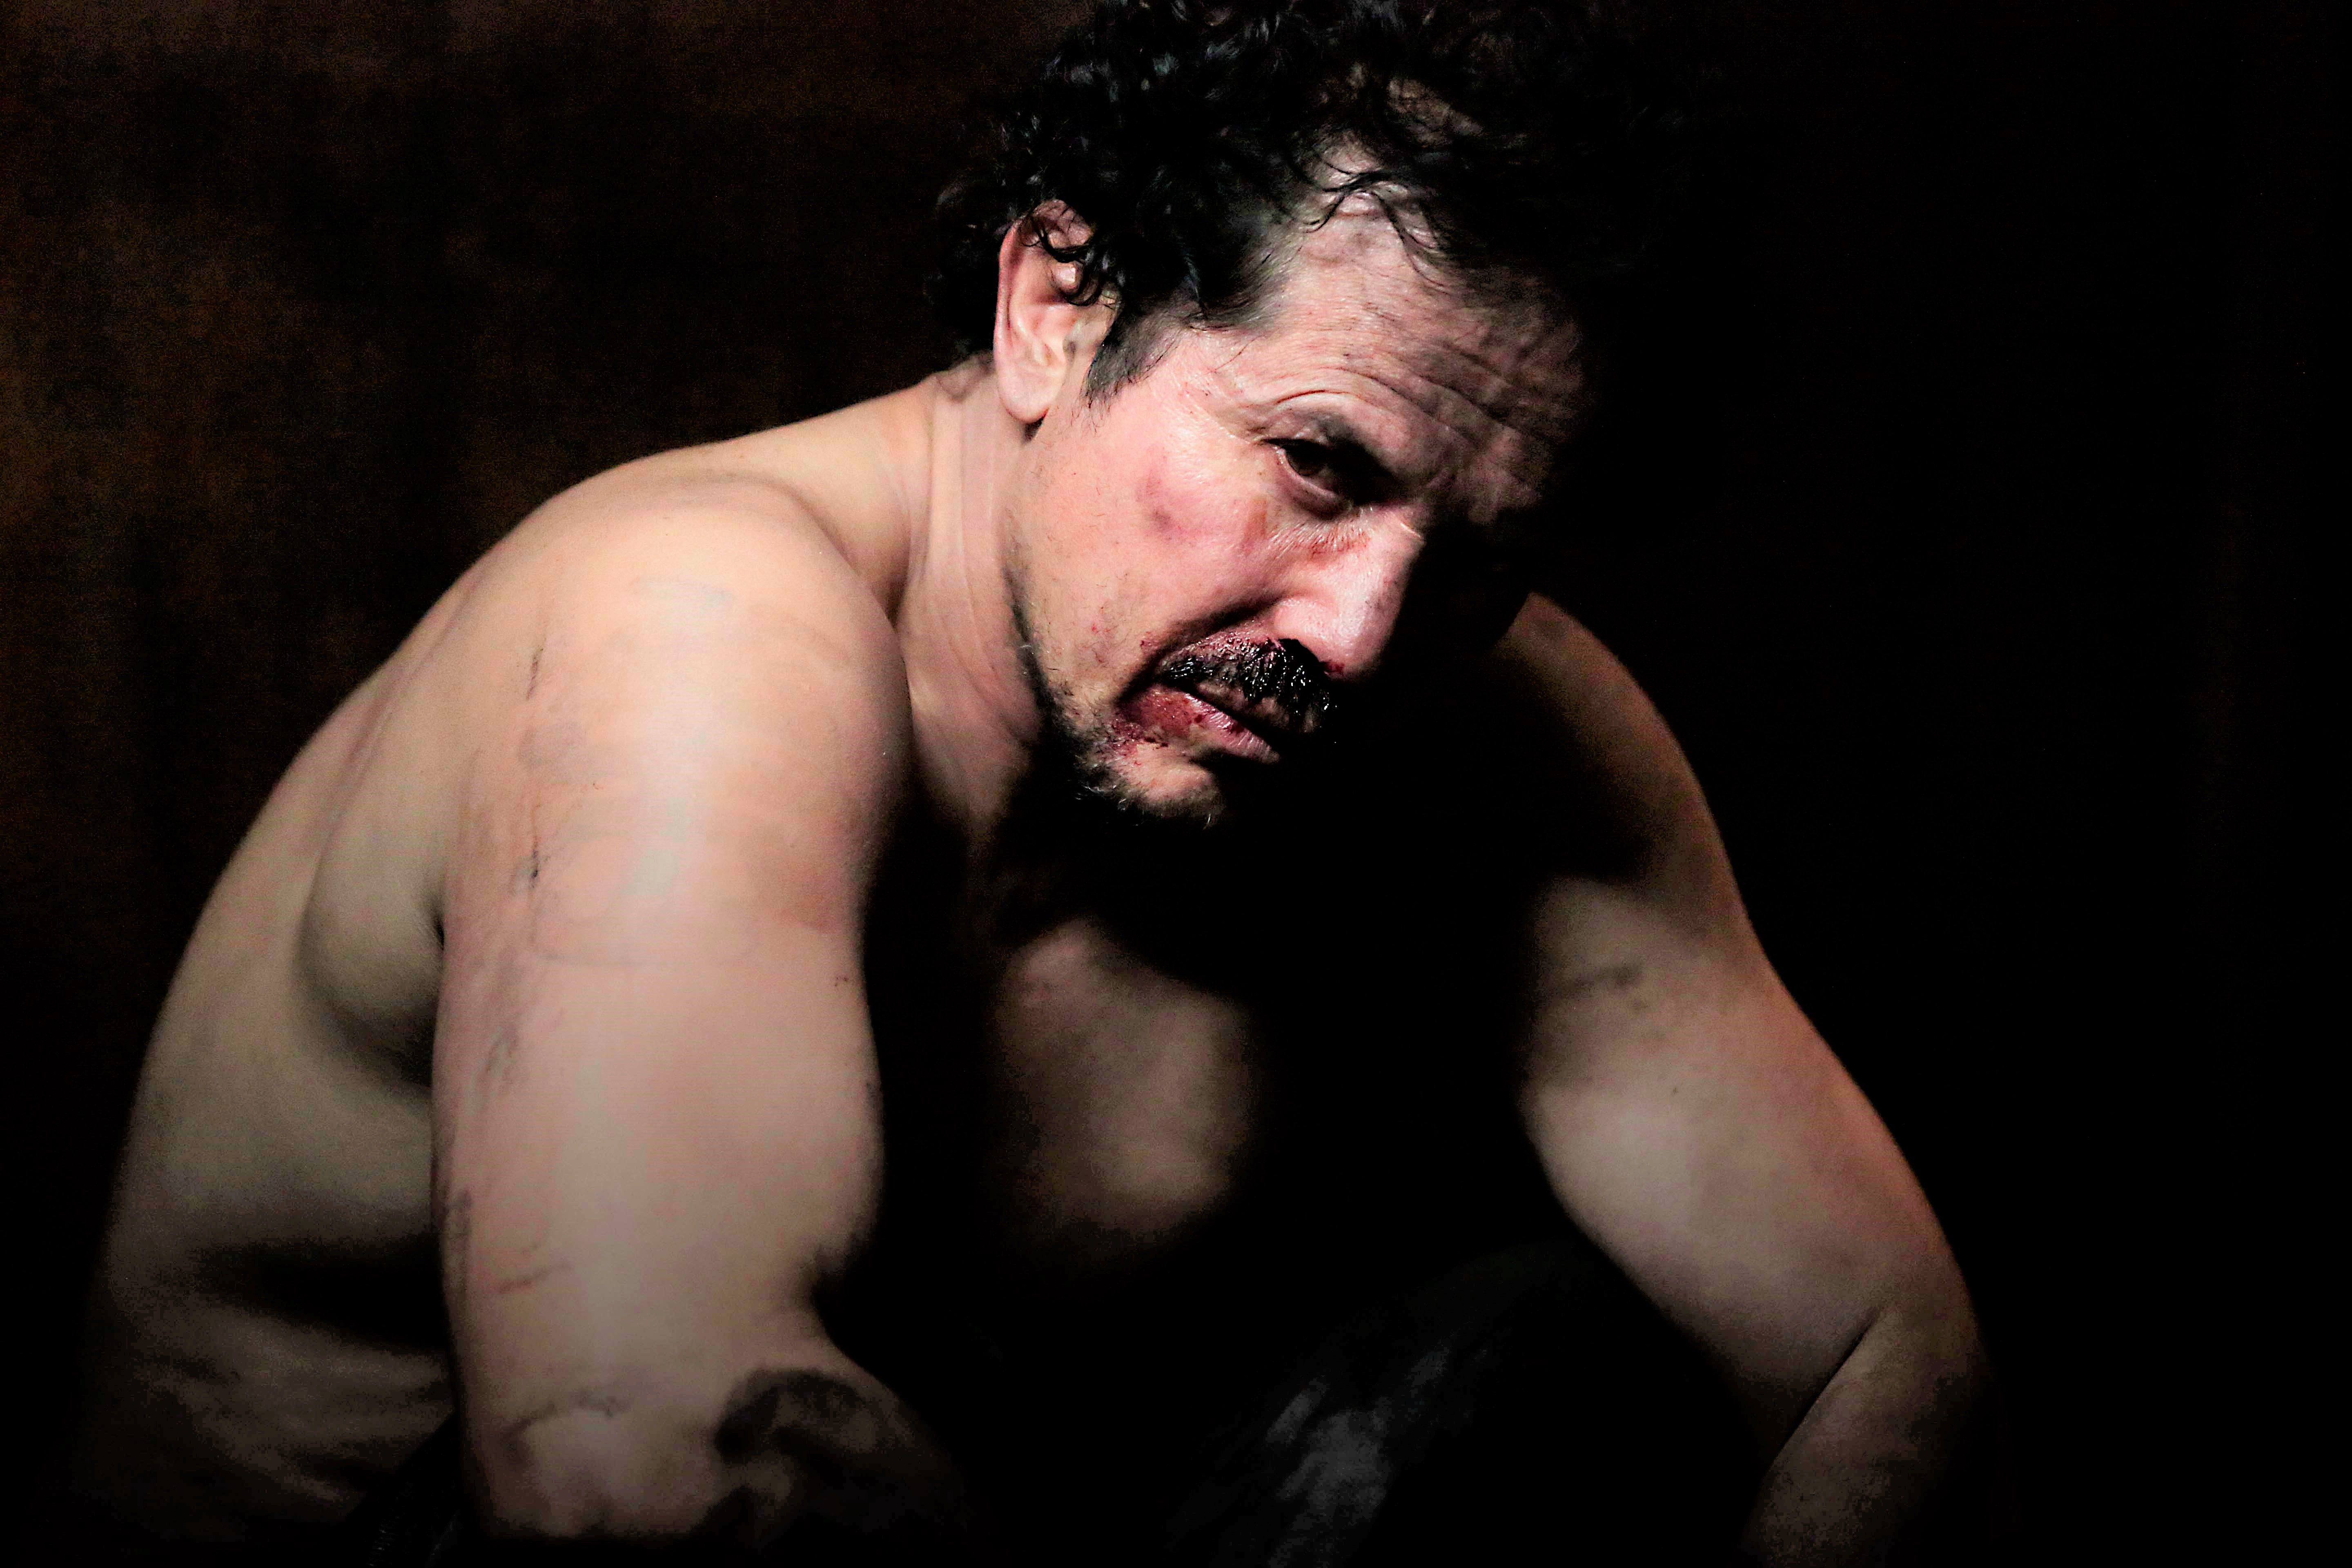 [Only IN Hollywood] John Leguizamo: From Madonna video extra to best lead role